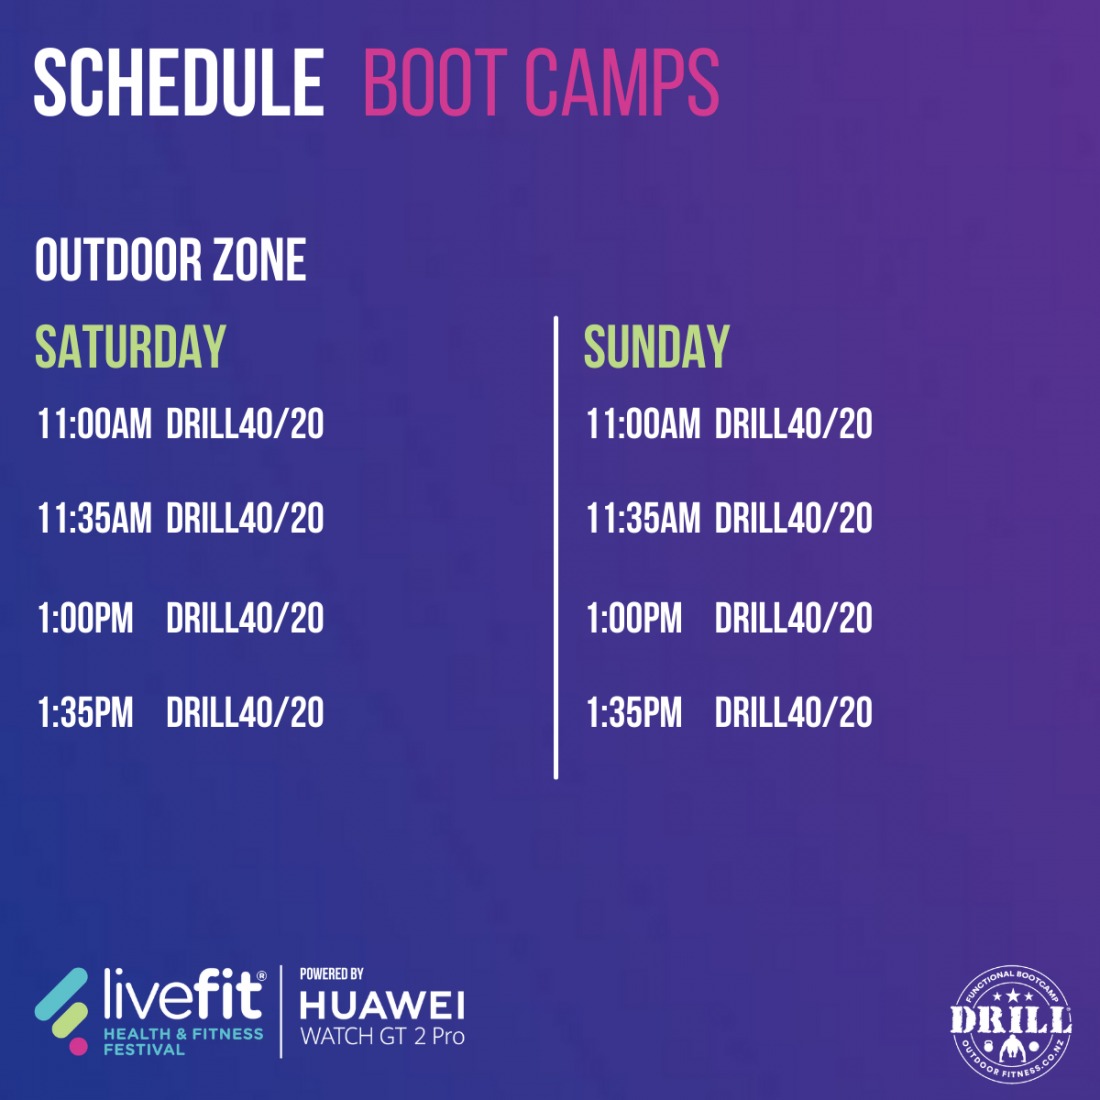 Schedule Boot Camps